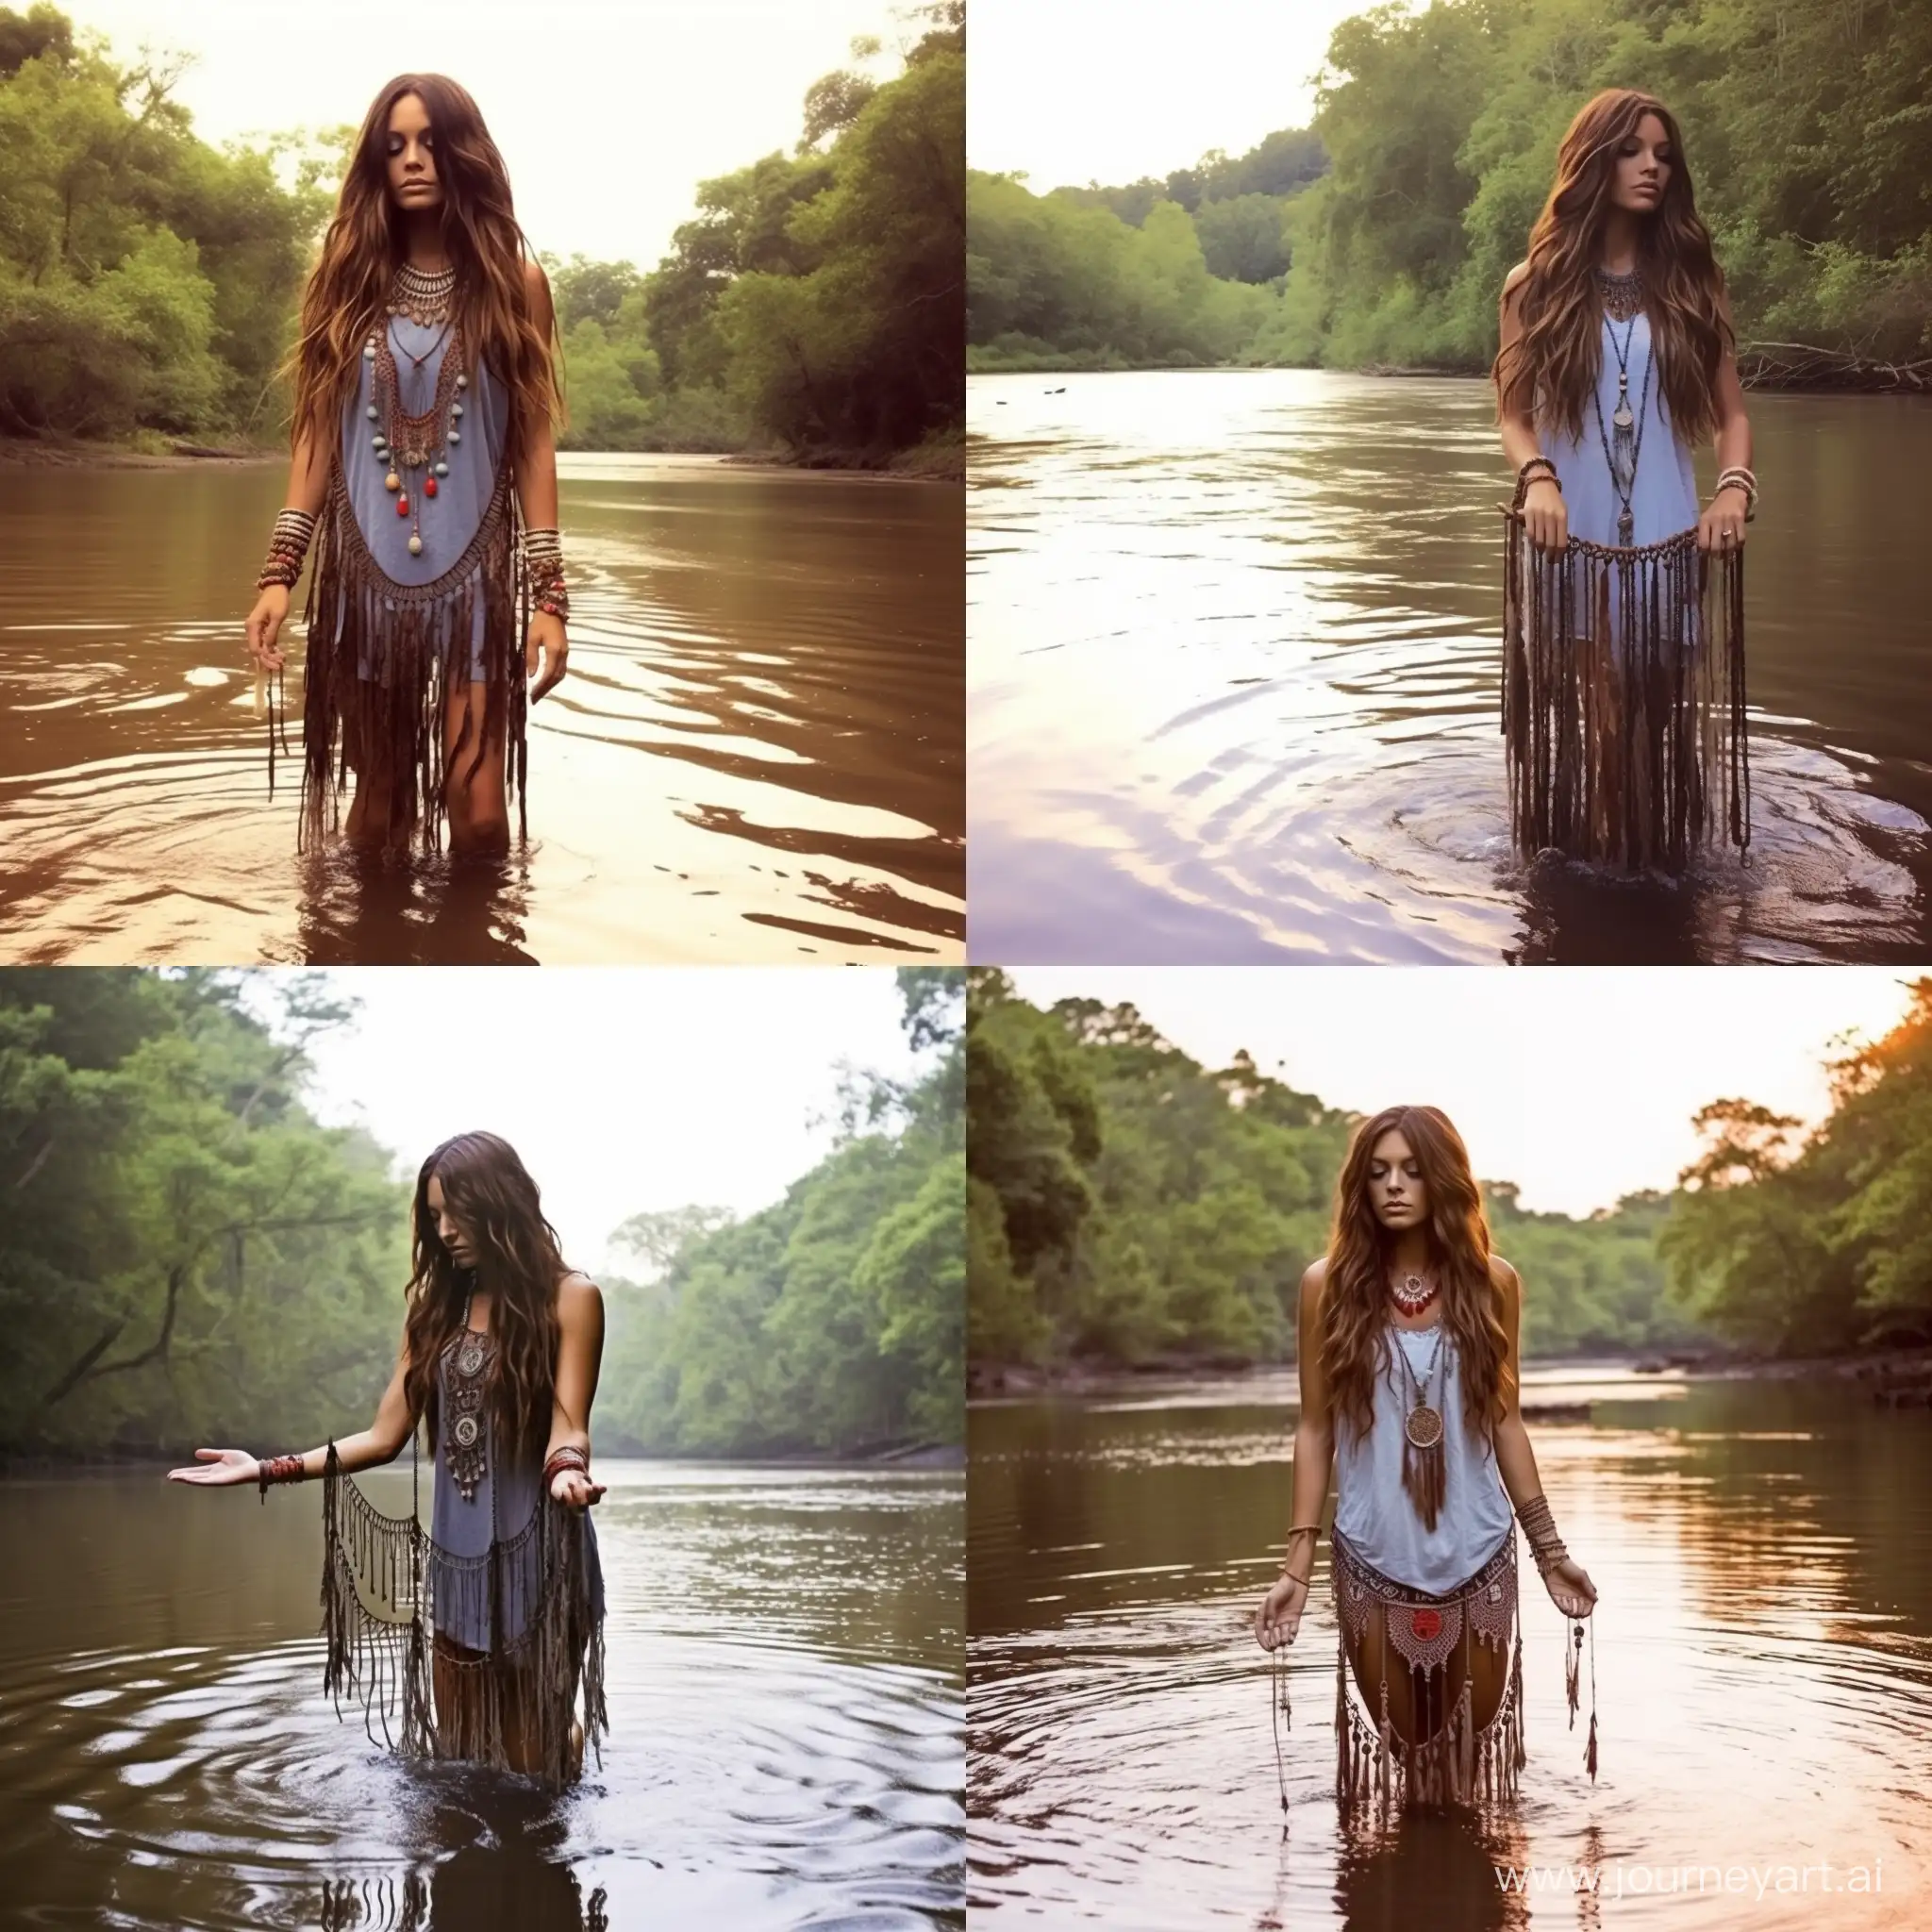 BohoStyle-Hippie-Girl-Splashing-in-River-with-Multilayer-Accessories